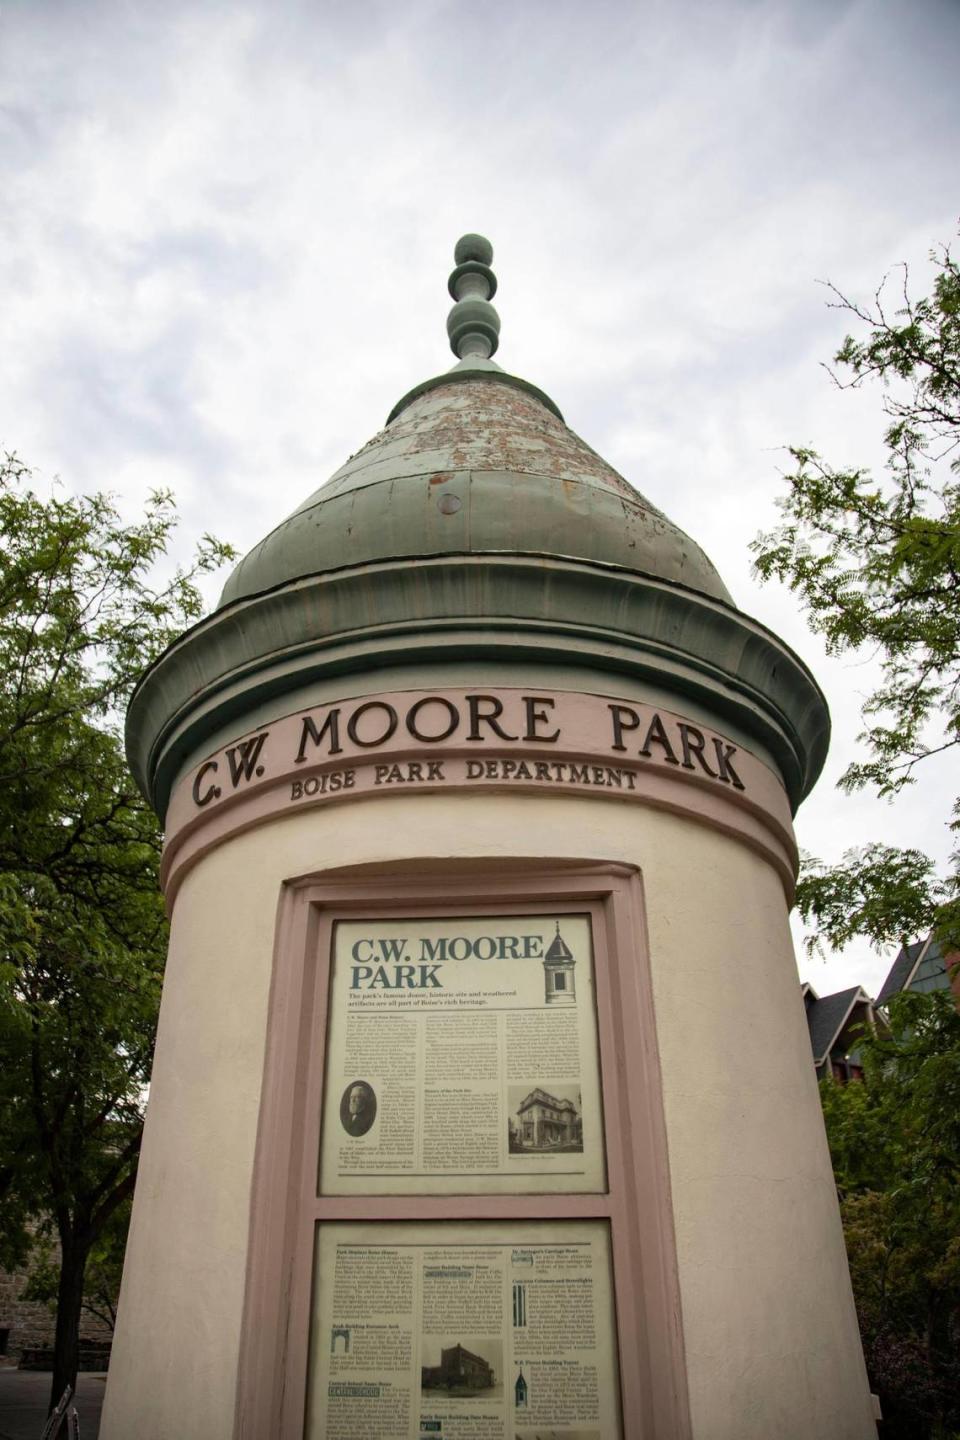 CW Moore Park is located at the corner of Grove Street and 5th Street. The city is looking to completely redesign the three blocks of Grove Street between 3rd and 6th Streets downtown.